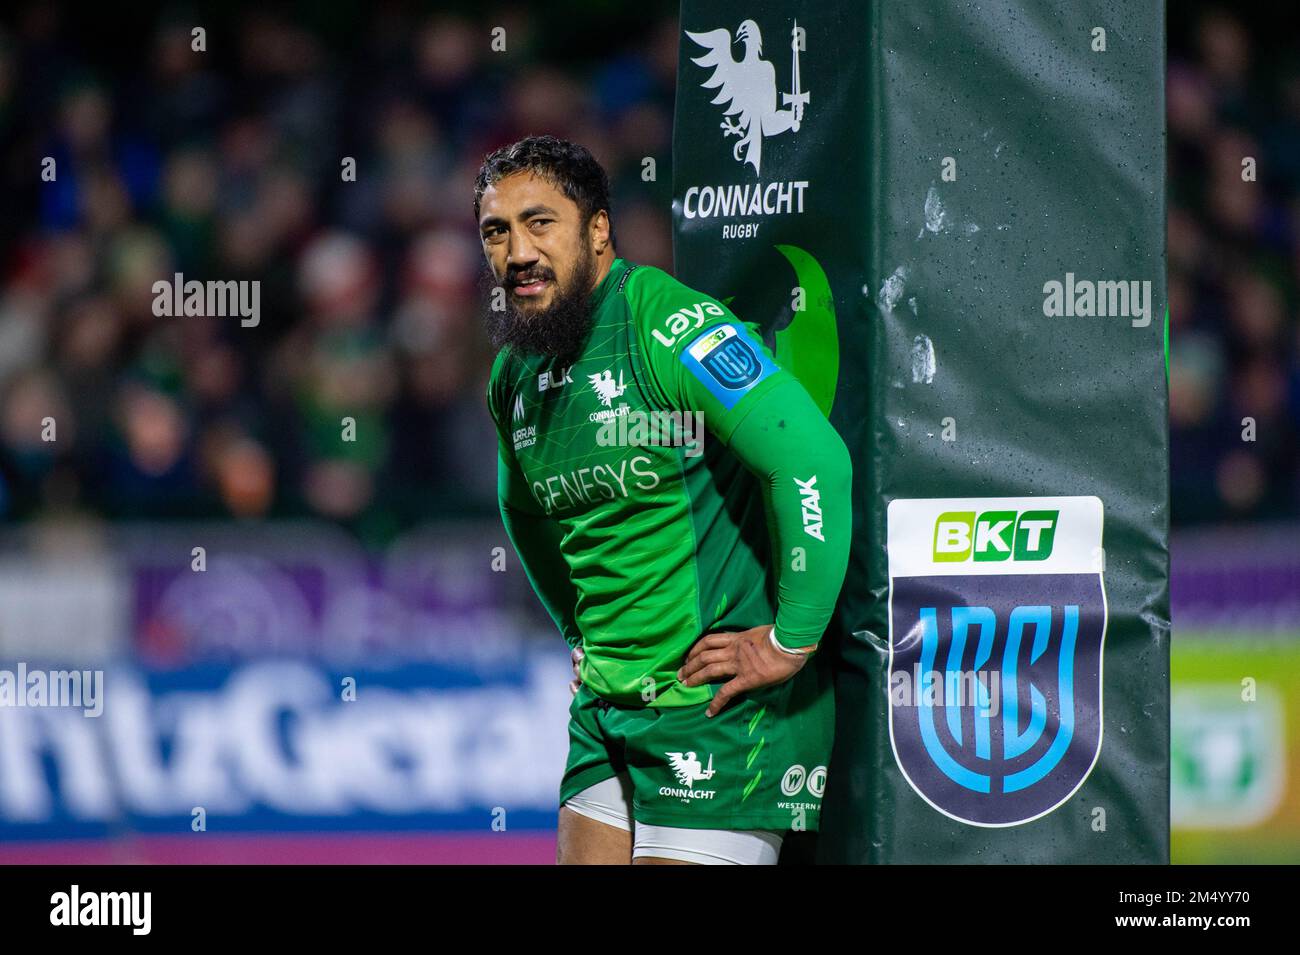 connacht rugby live